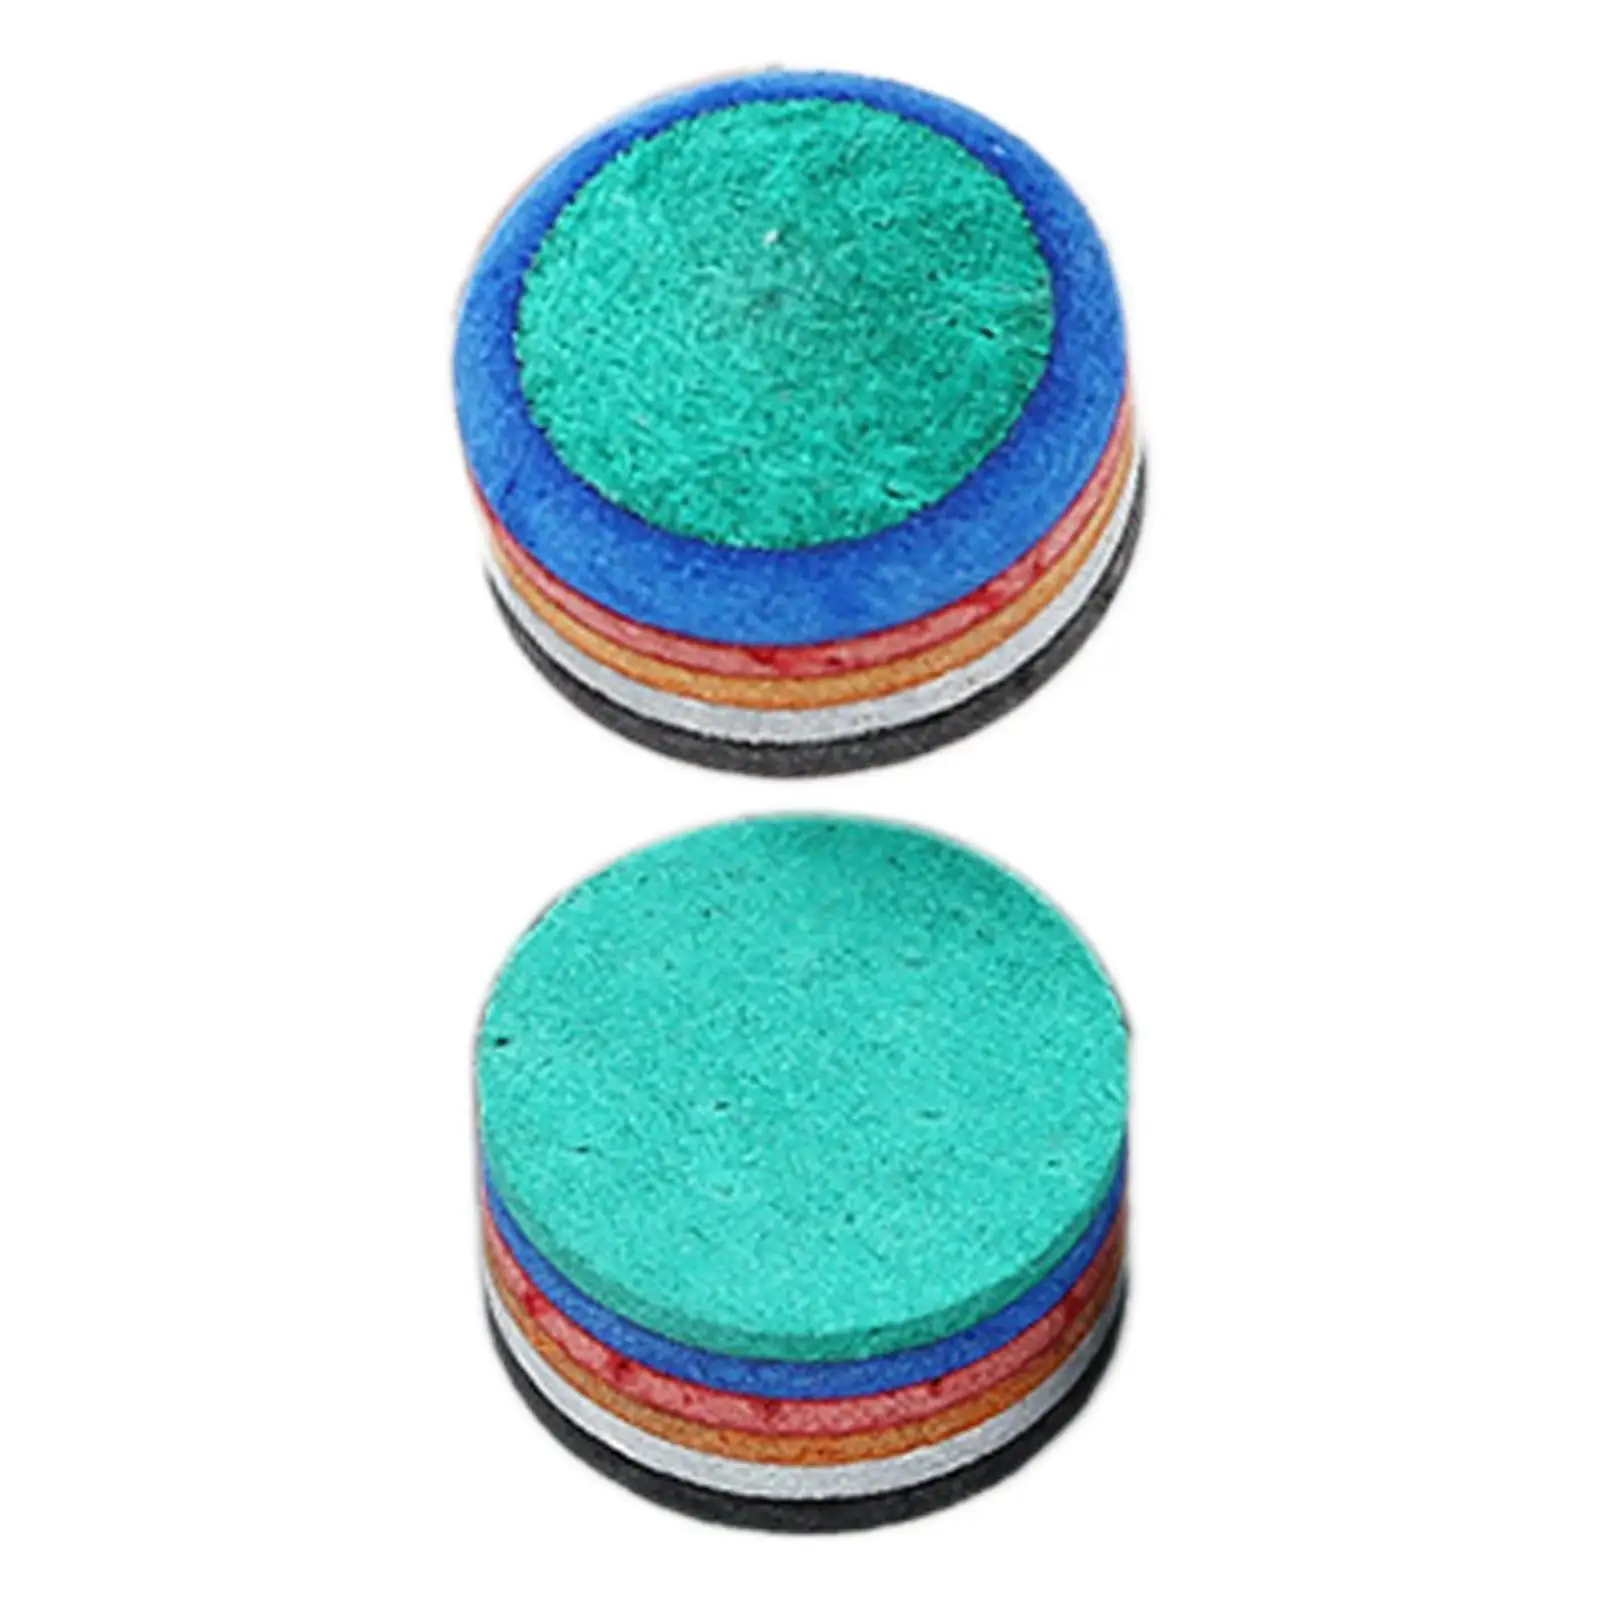 Pool Cue Tip Hard Snooker Pool Cue Tip Multiple Layer Glue on Durable Head for